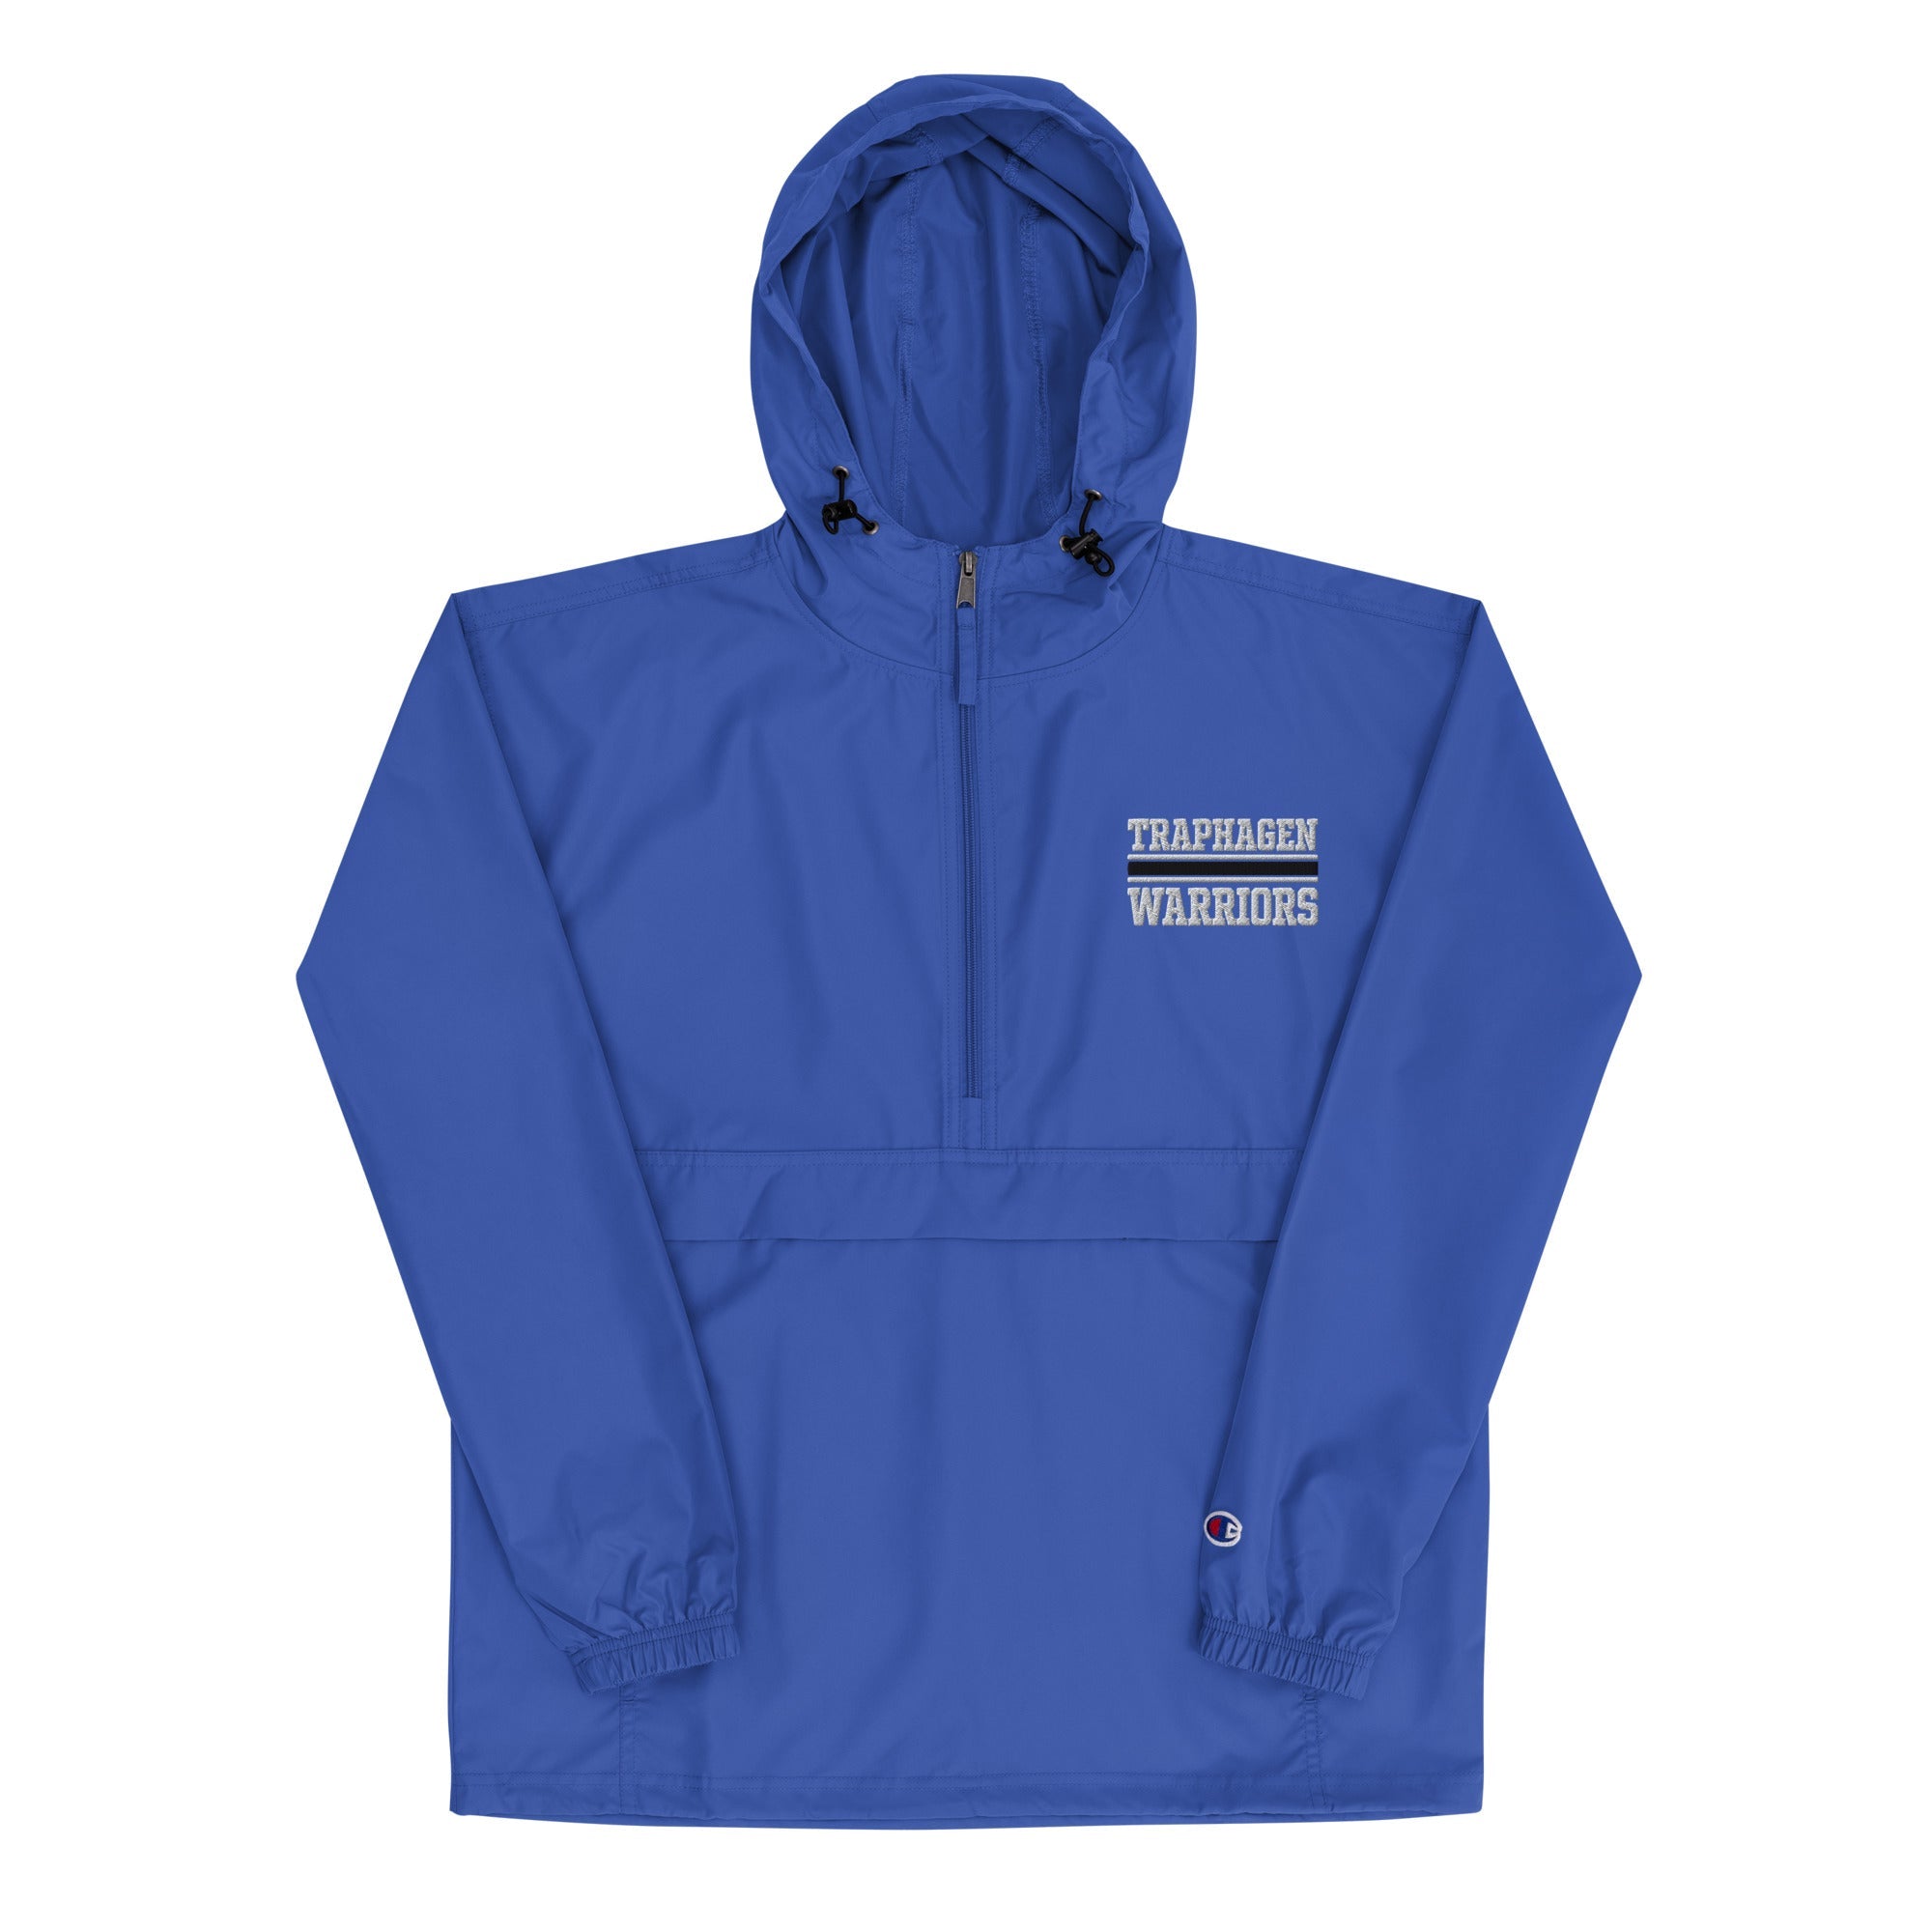 Traphagen Embroidered Champion Packable Jacket